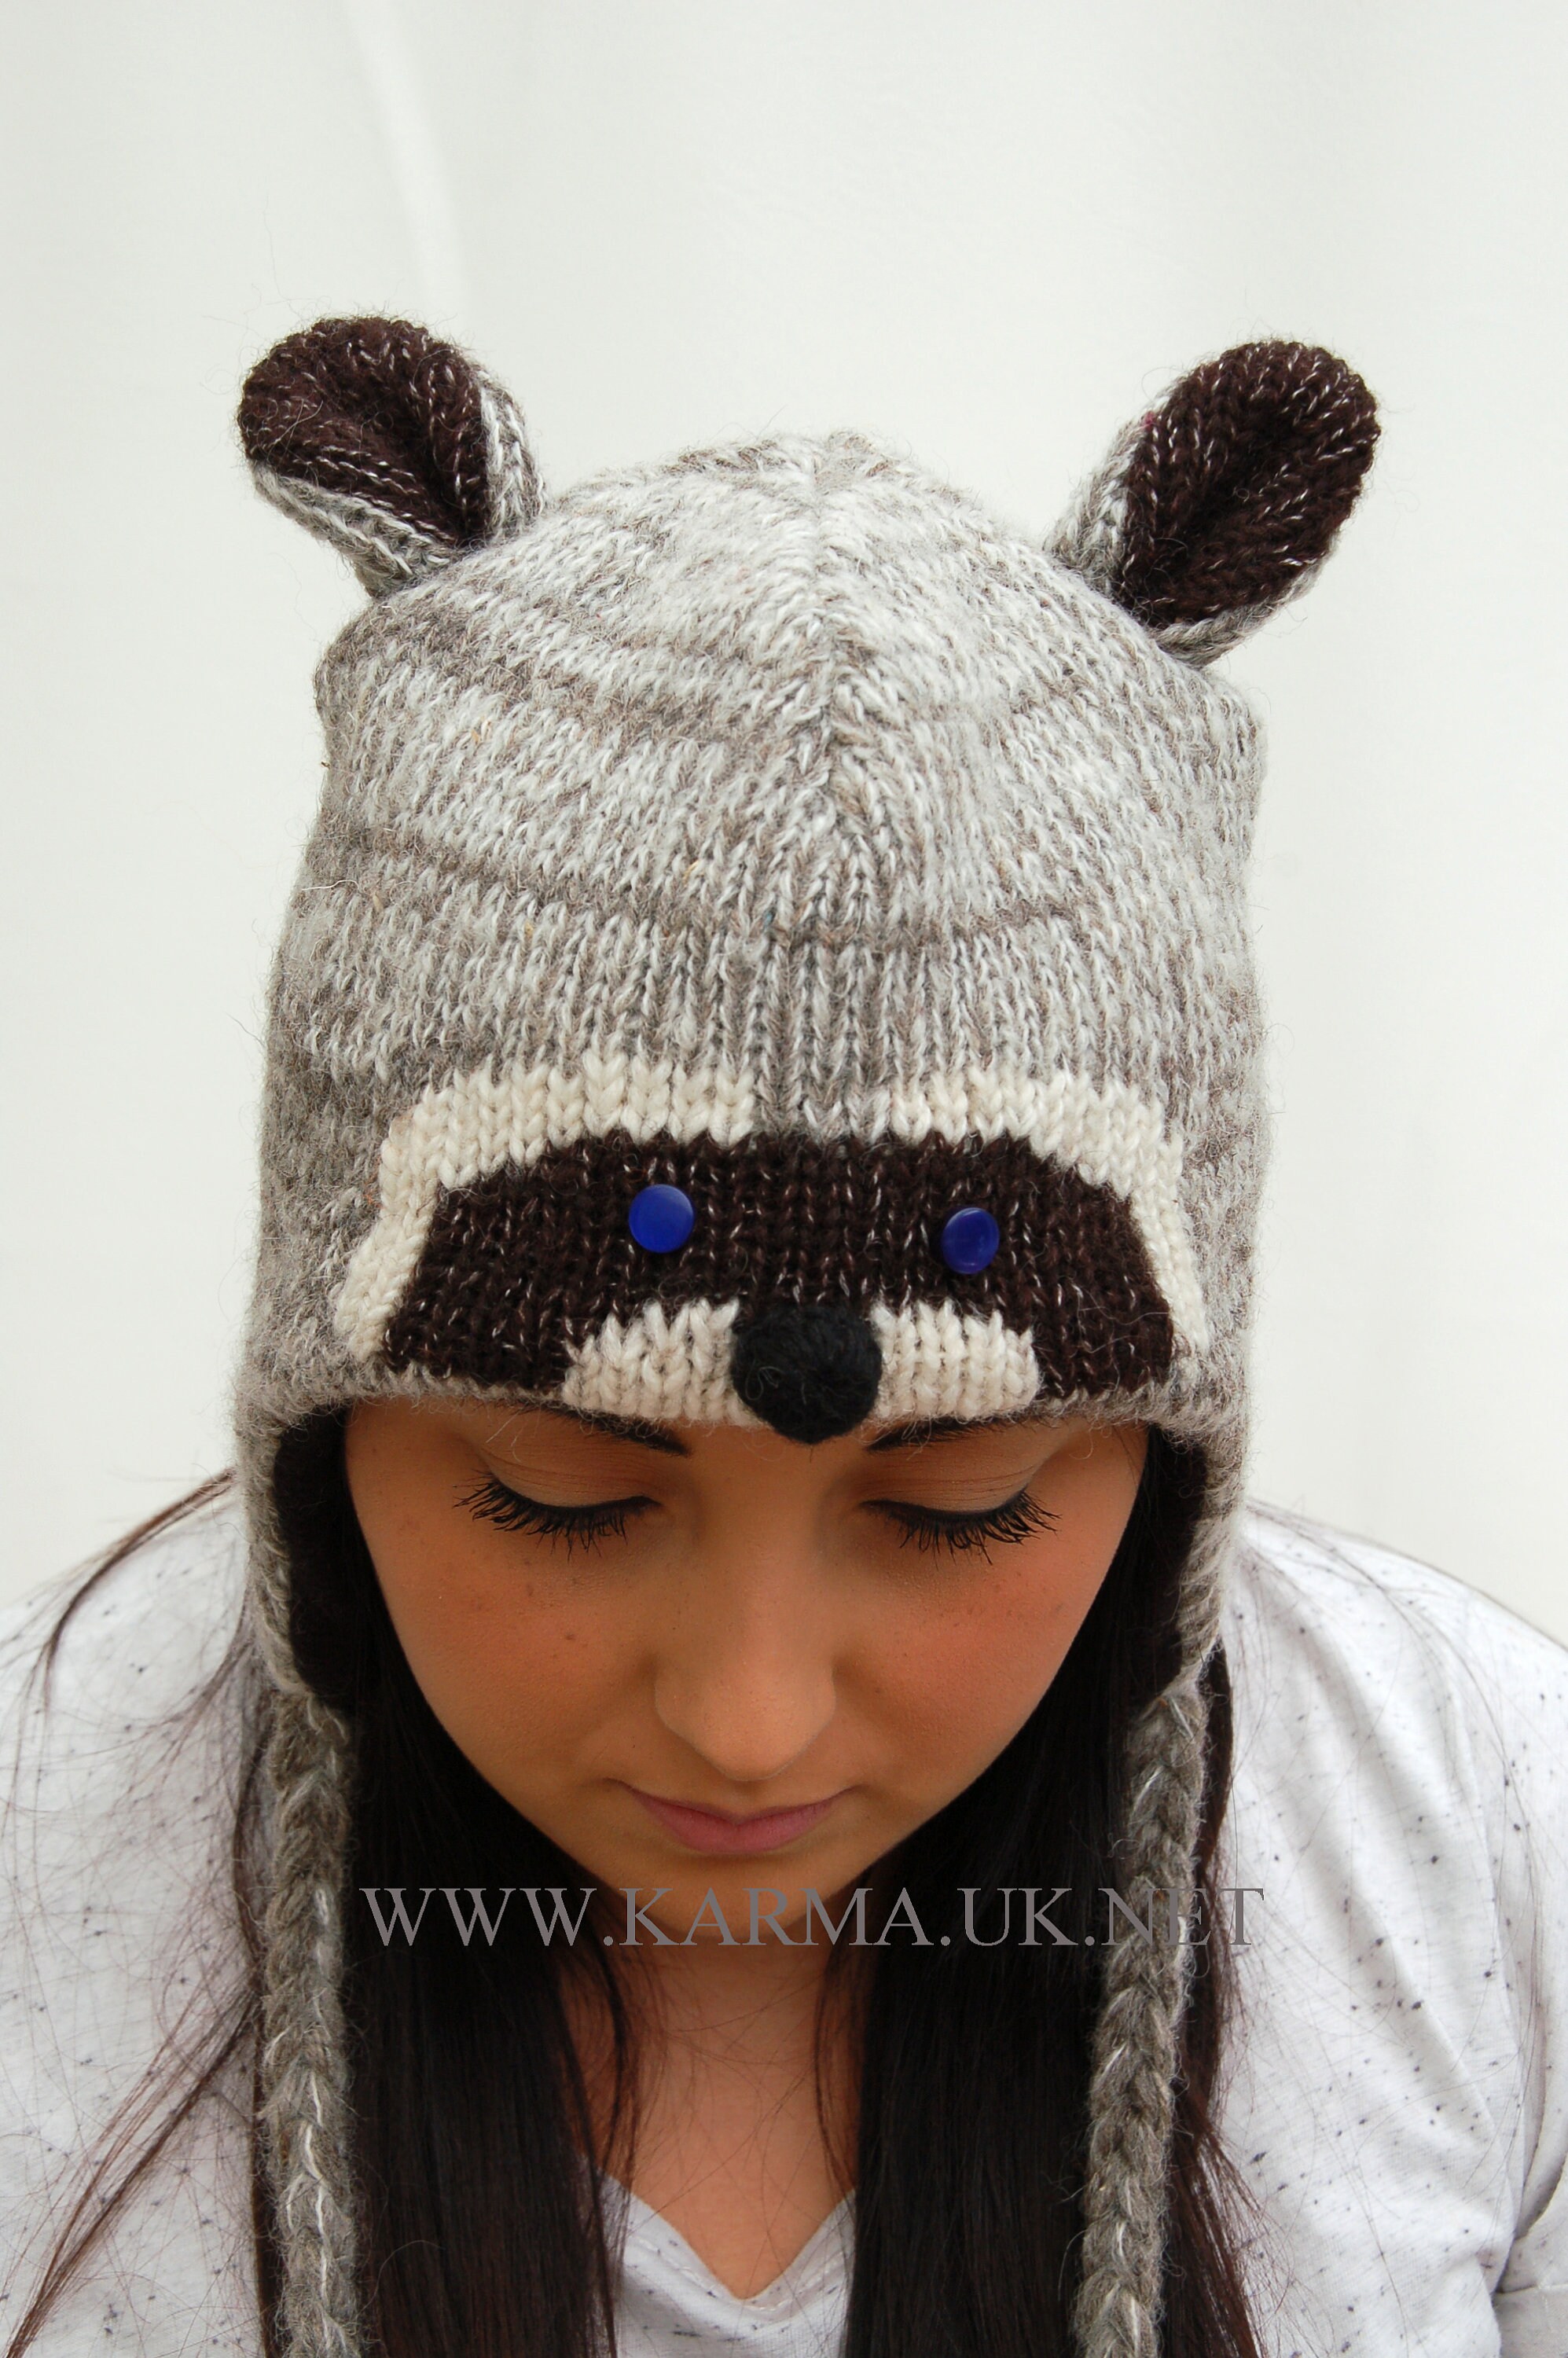 Unisex Adult Child Knitted Raccoon Hat Warm Festival Novelty Ski Party